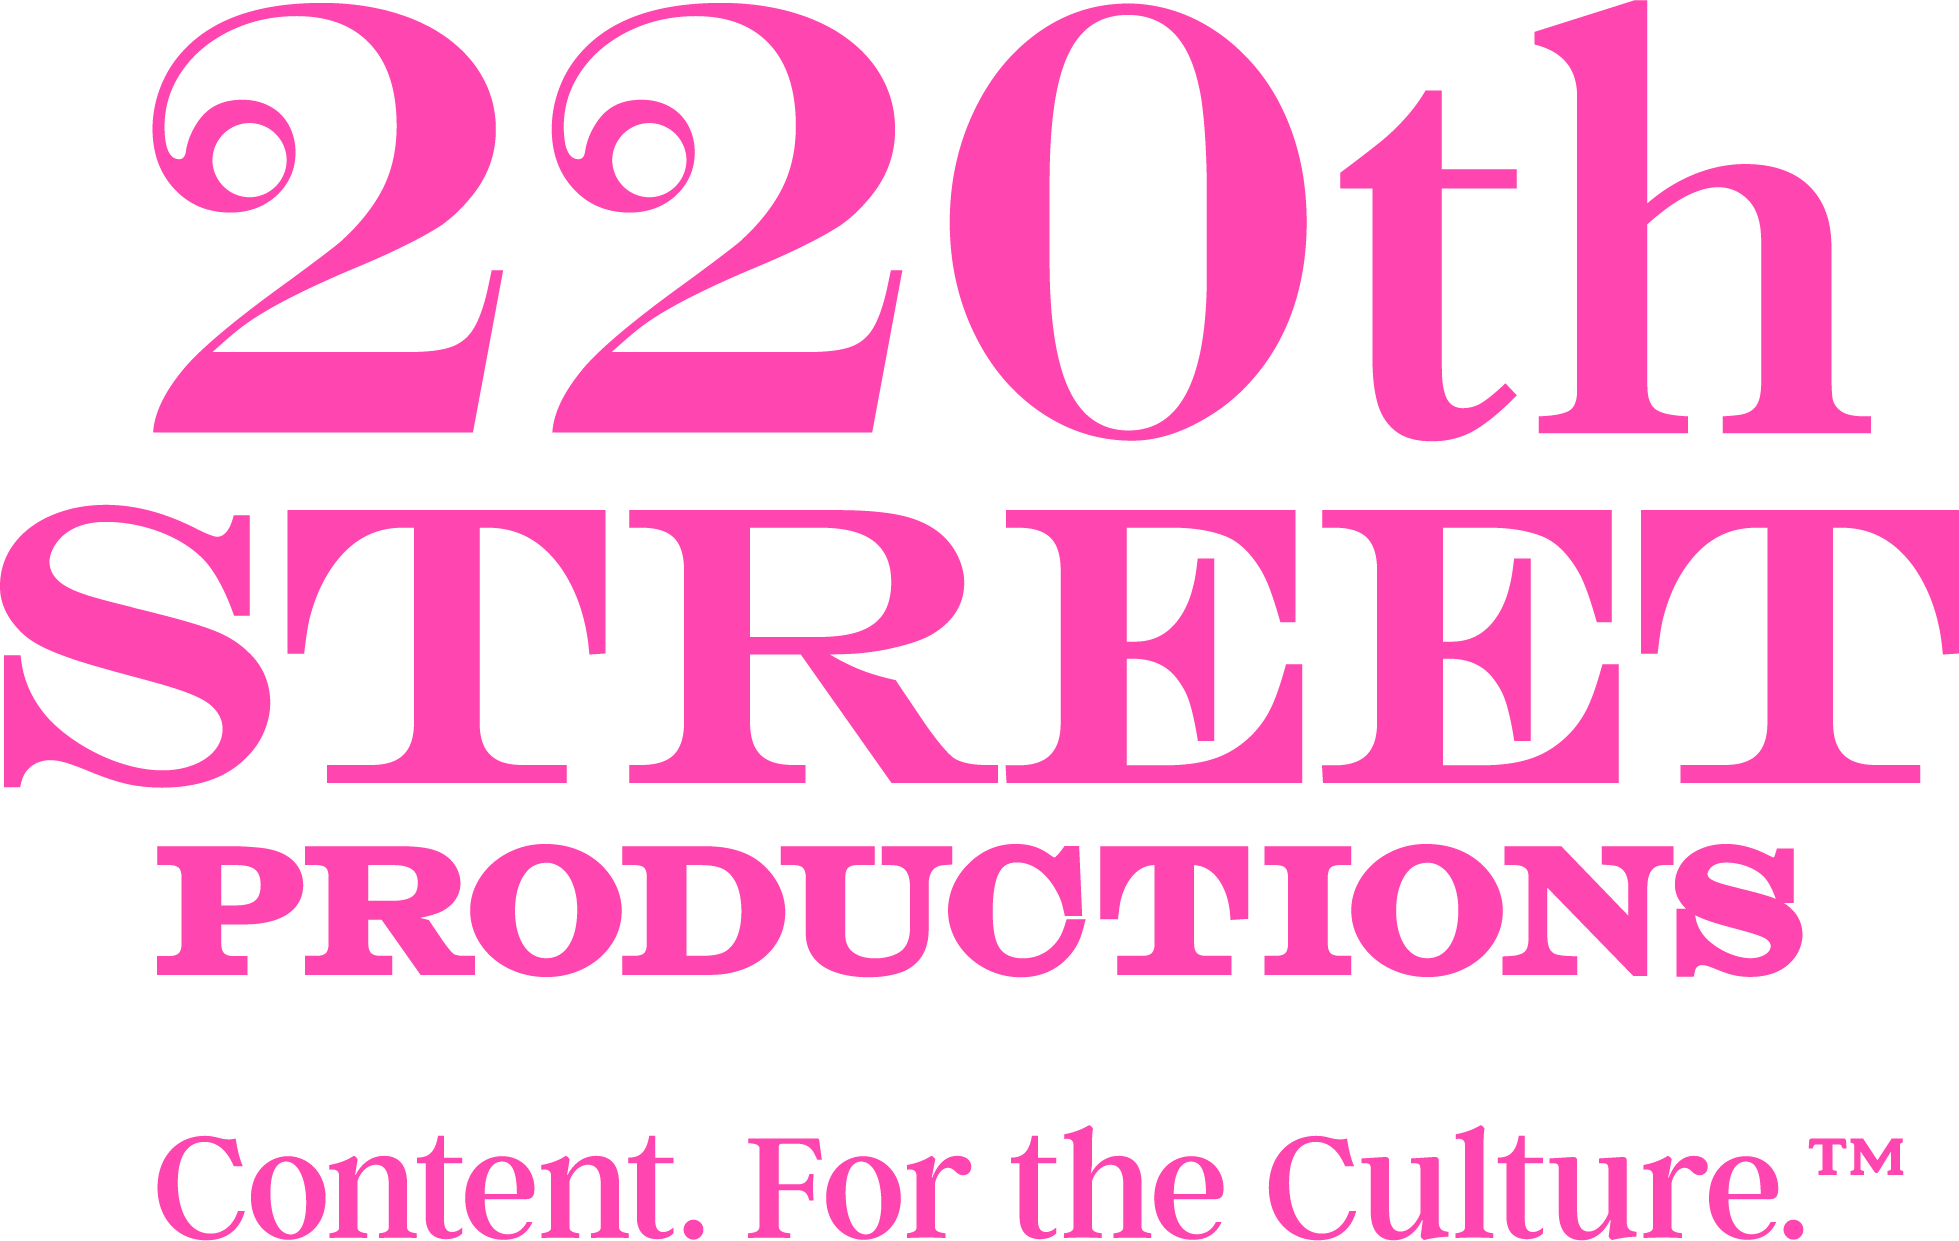 220th Street Productions